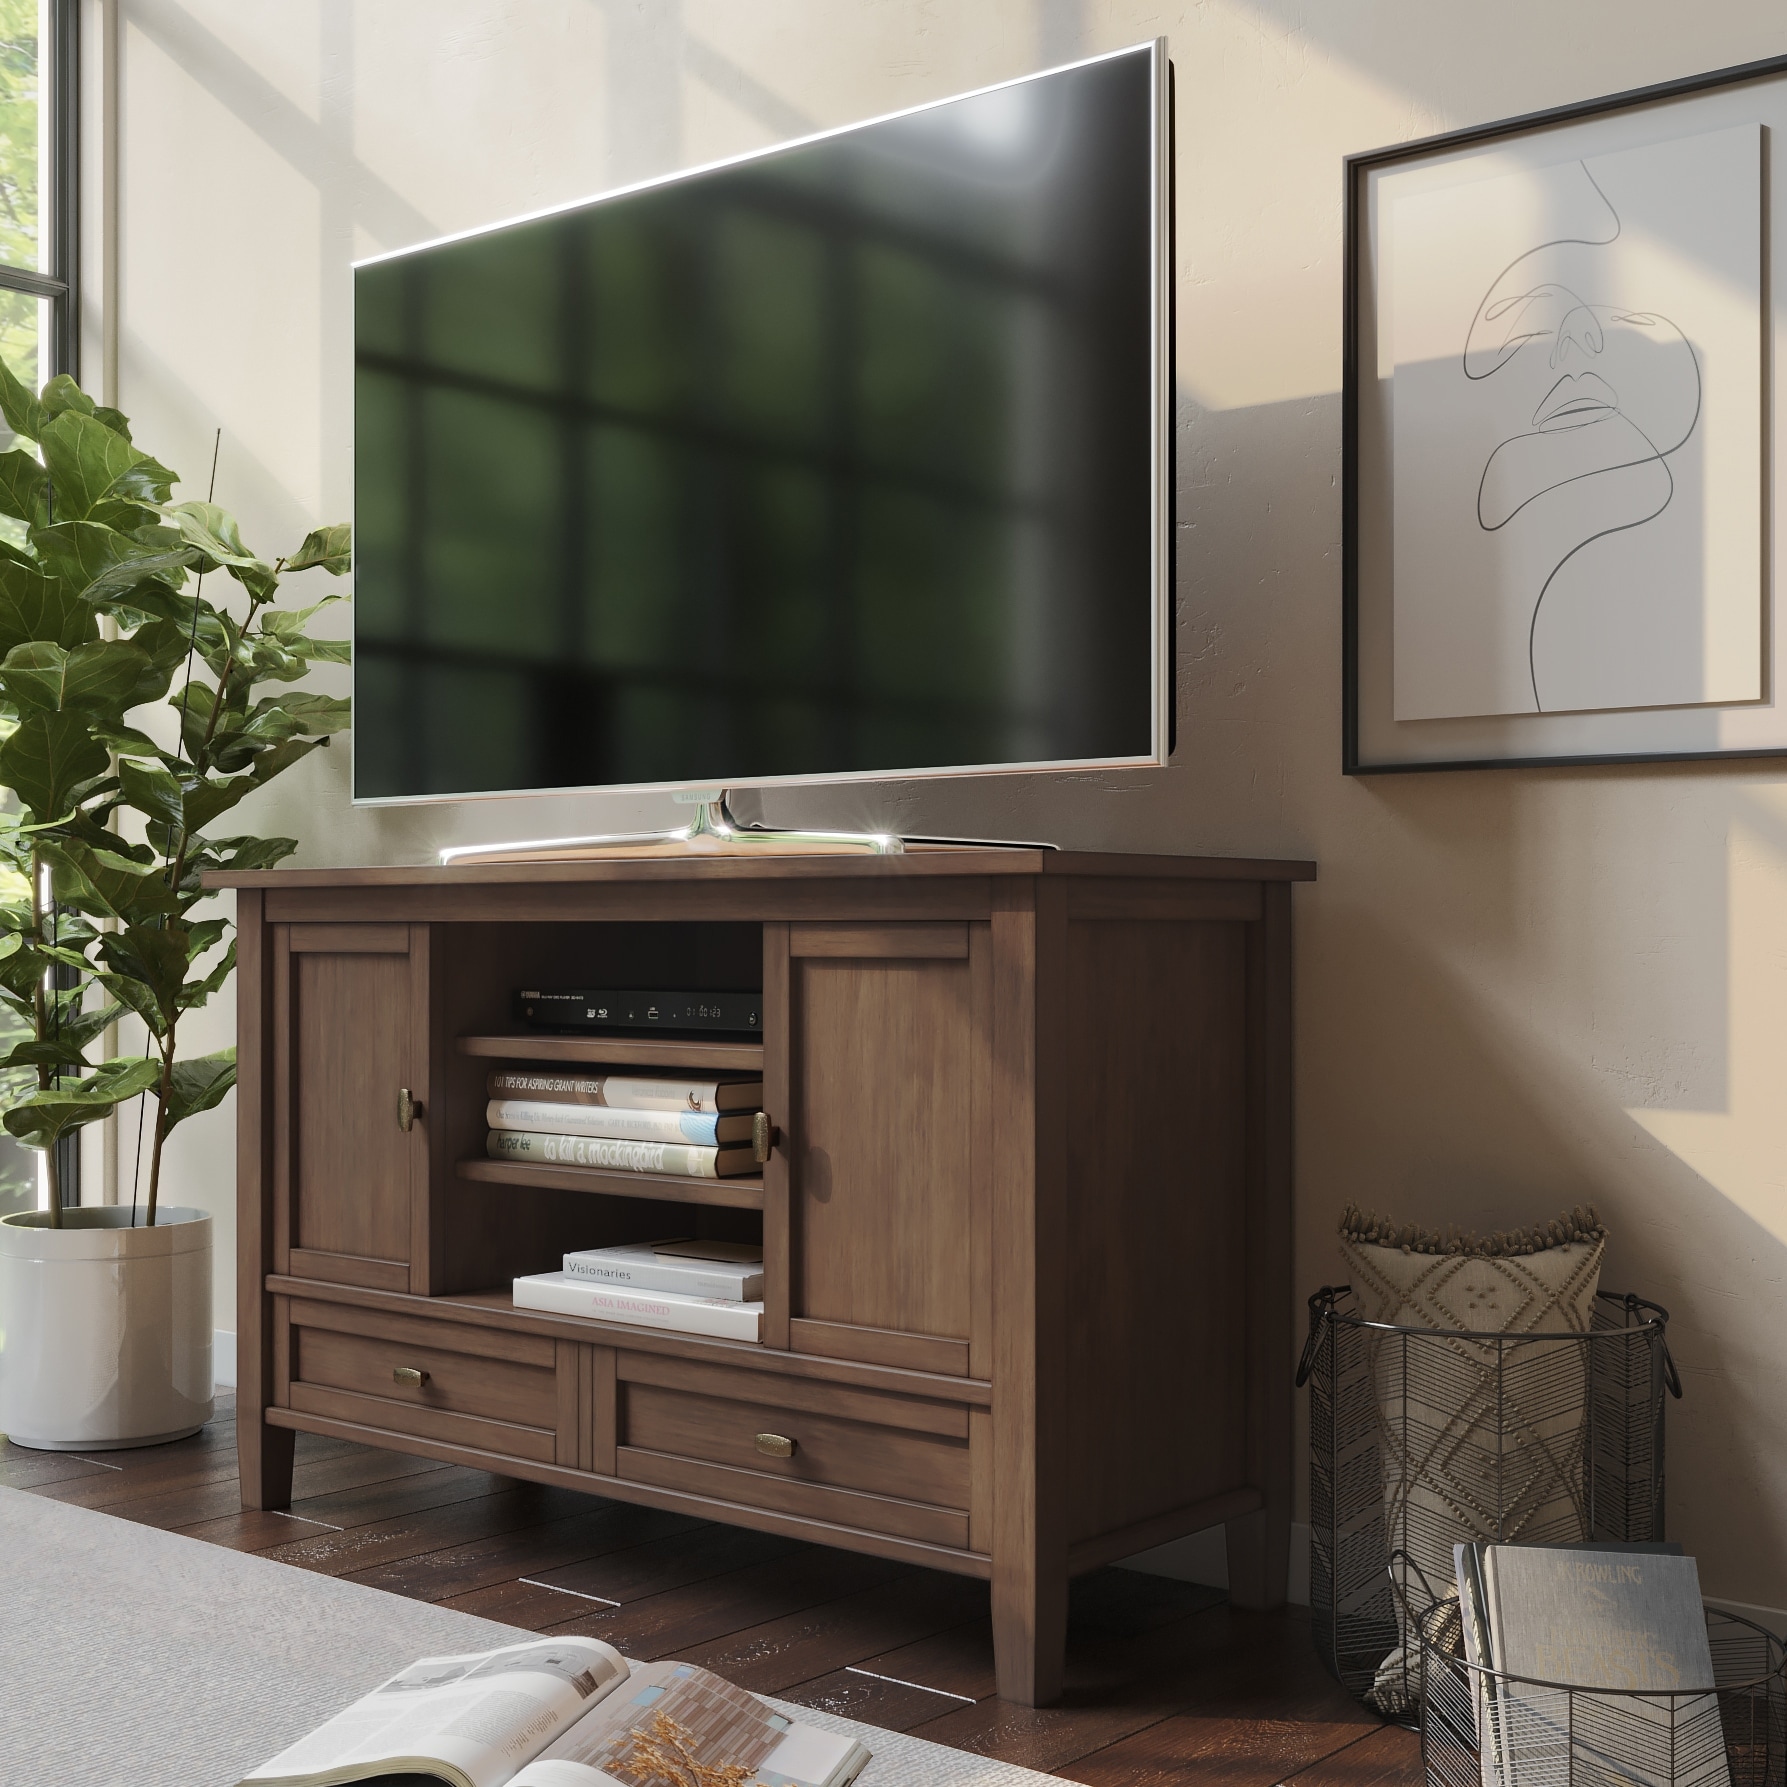  Martin Furniture Asymmetrical Floating Wall Mounted TV Console,  72inch, Light Brown, 72 : Home & Kitchen